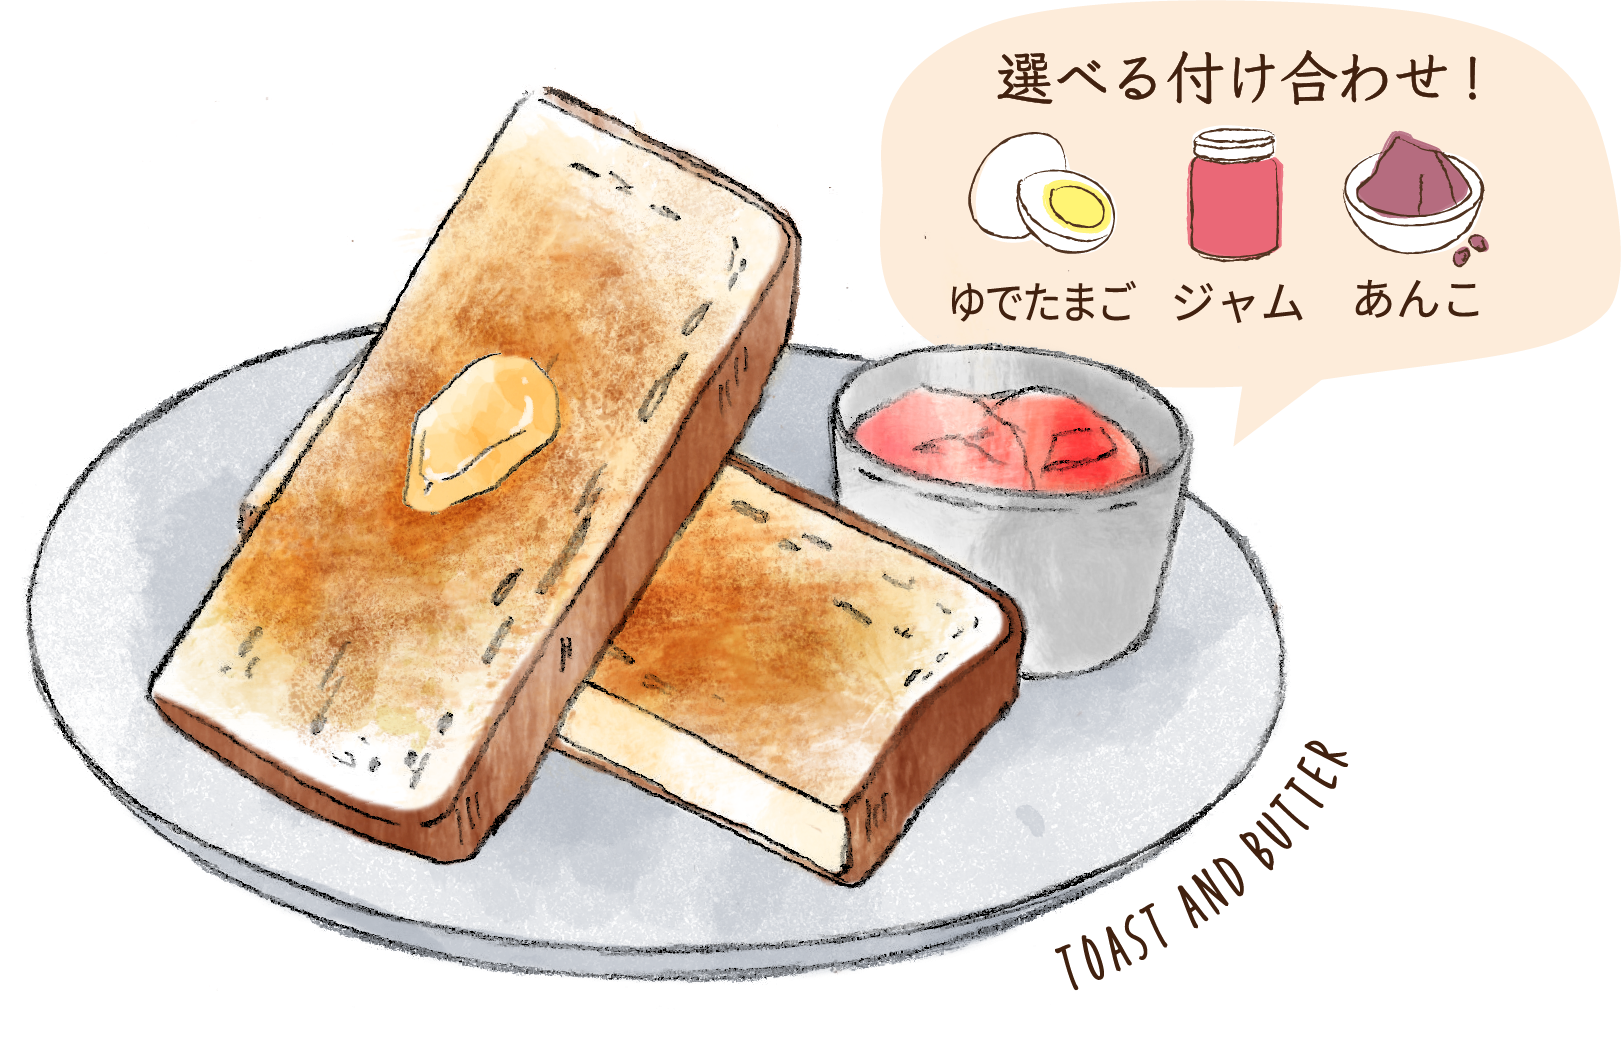 TOAST AND BUTTER